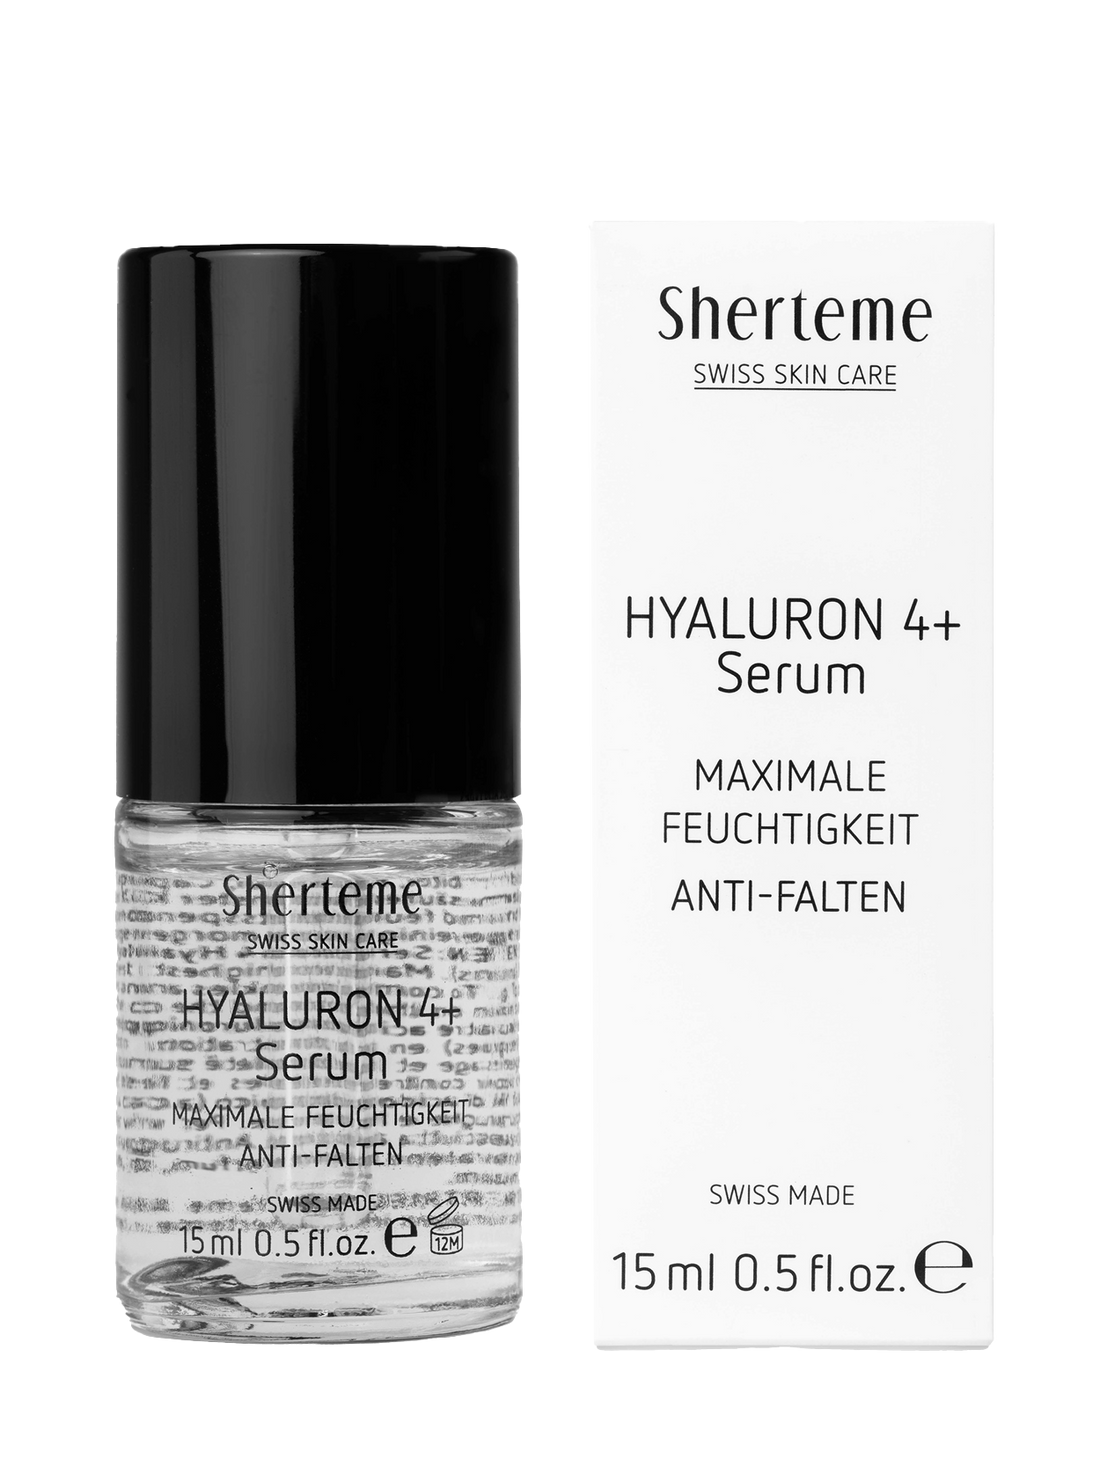 Hyaluronic Acid 4+ Serum | Hyaluronic concentrate